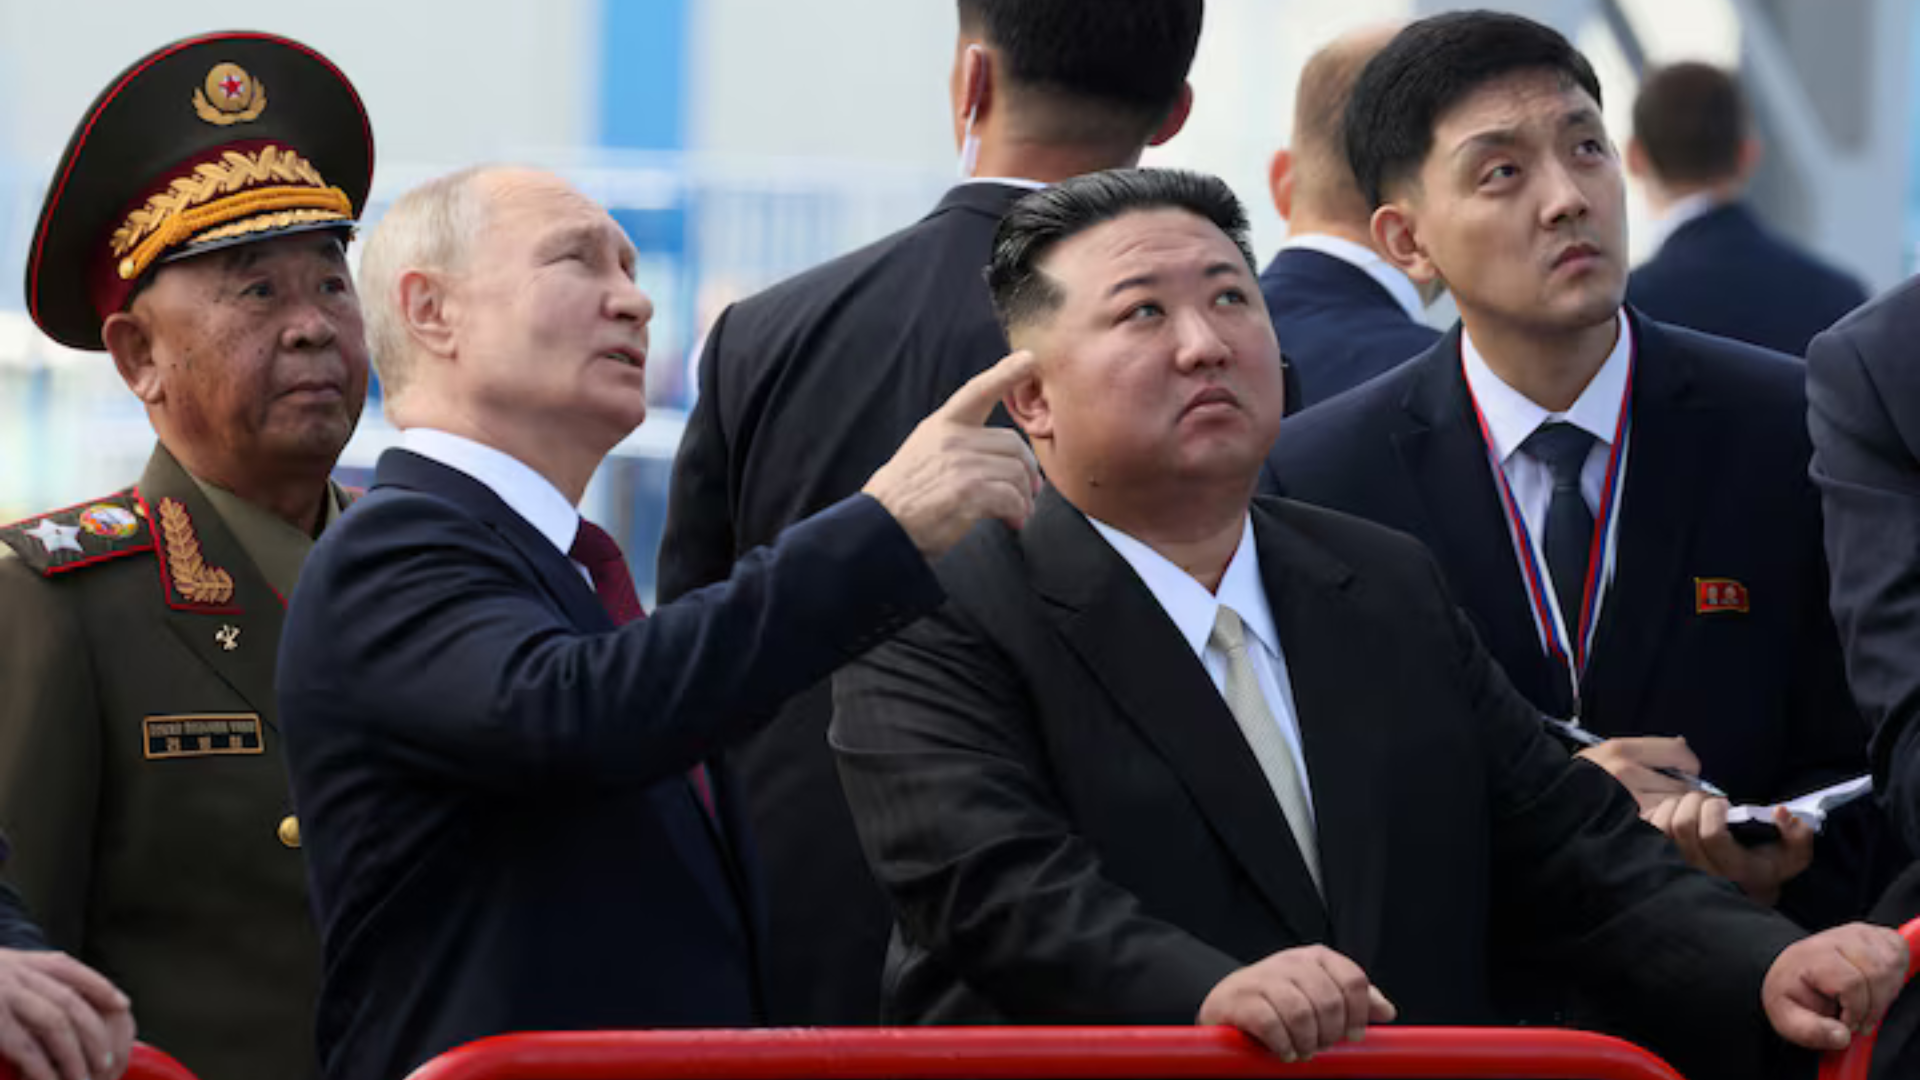 Putin Arrives in North Korea, Vows to ‘Oppose’ Western Sanctions